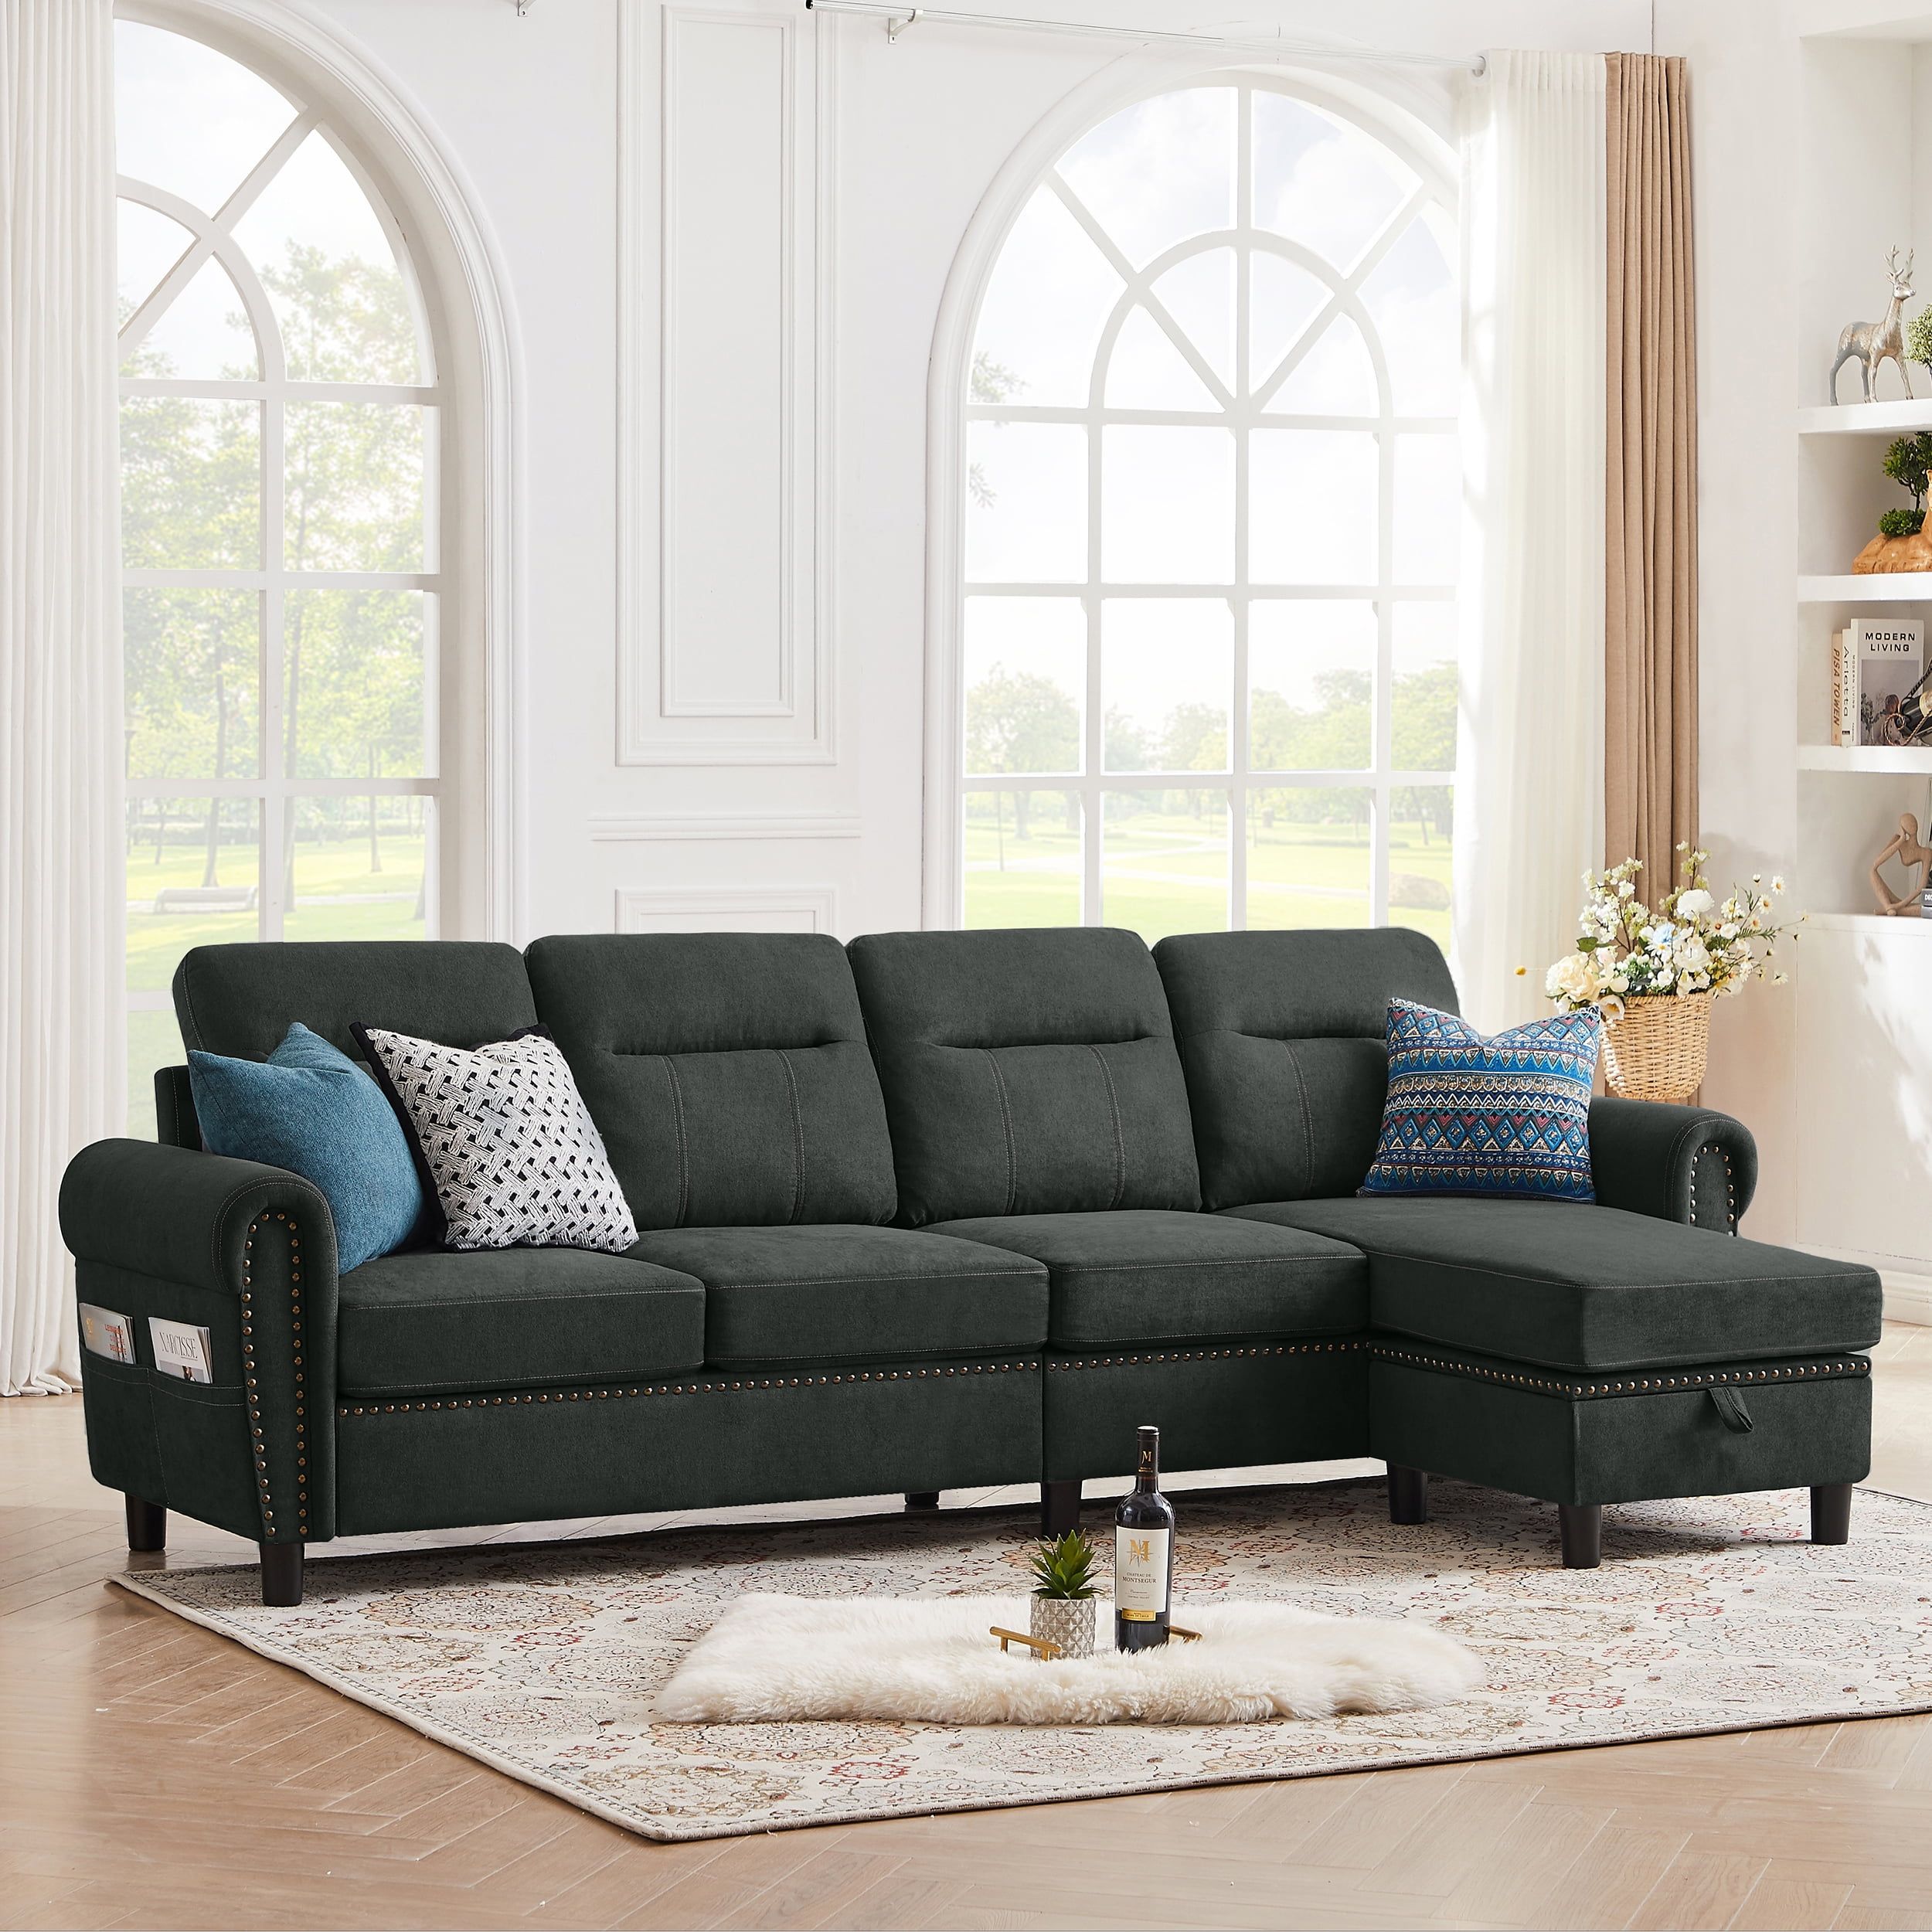 Jarenie Modern Sectional Sofa Couch With Reversible Chaise L Shaped Couch  4 Seat Convertible Sofa For Living Room ,sectional Couch ,living Room  ,darkgrey – Walmart Intended For L Shape Couches With Reversible Chaises (View 7 of 15)